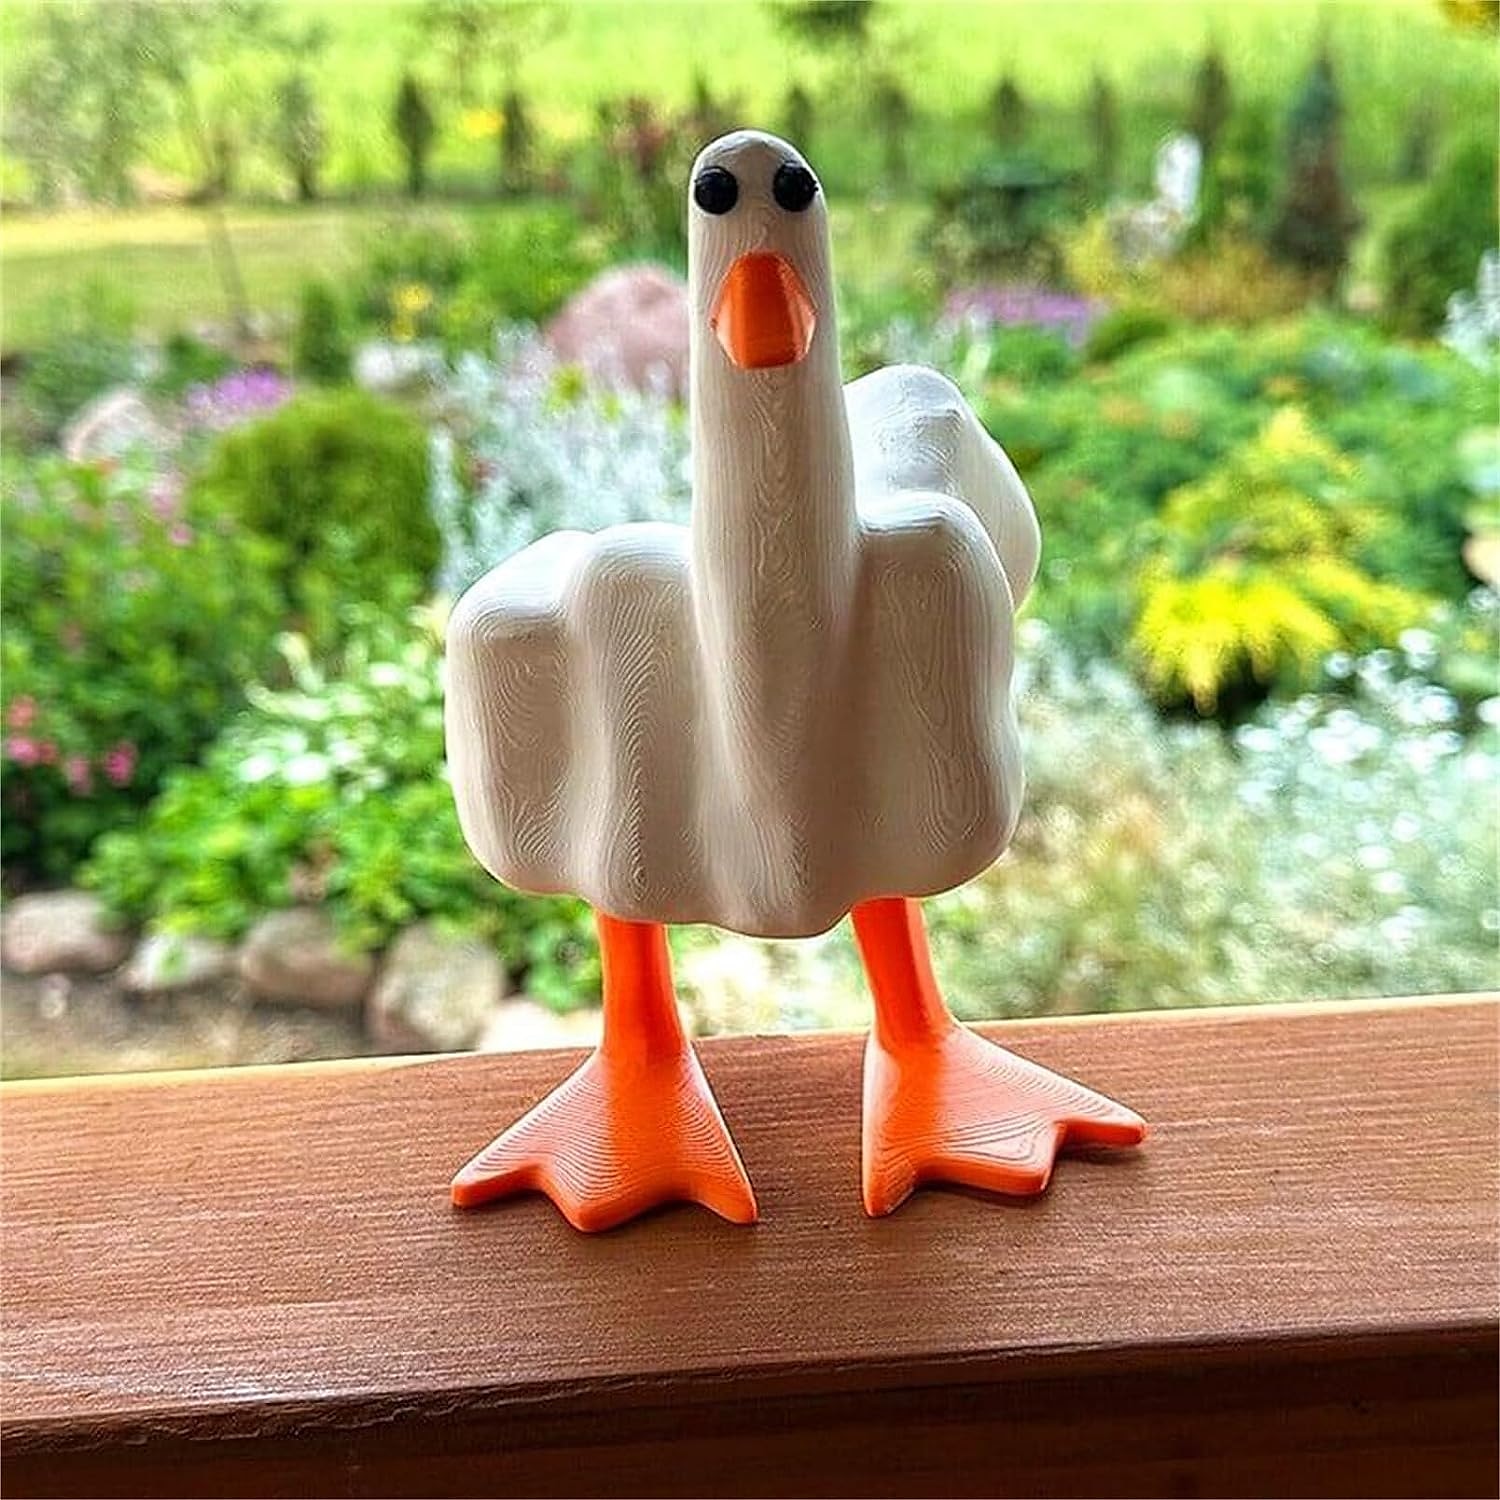 New Duck You Refers To The Cartoon Duck Resin Crafts Garden Sculpture Decoration Design Micro-Landscape 2023 - GBP £9 –P8